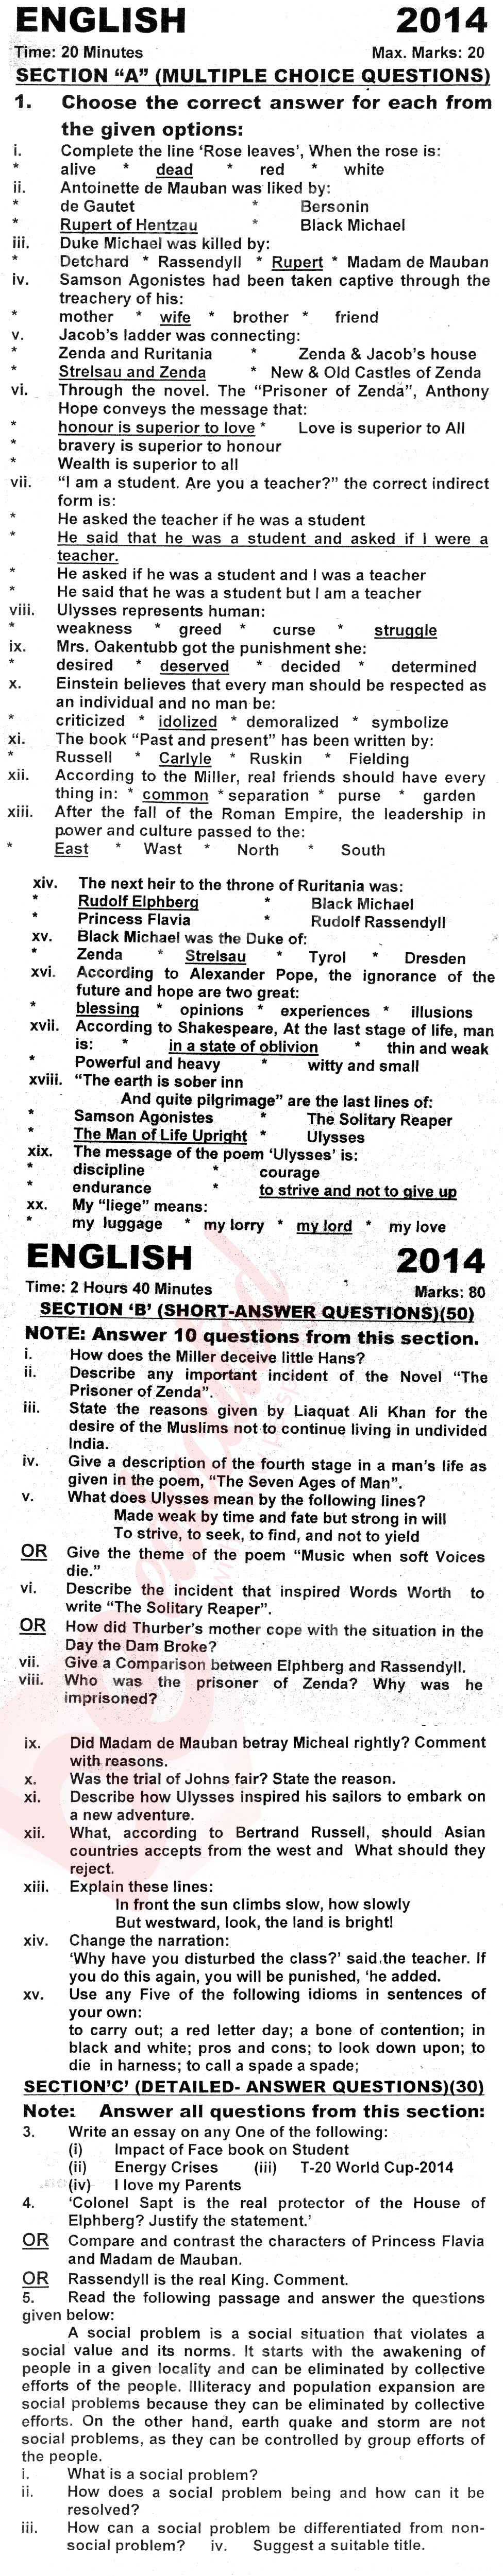 English 12th class Past Paper Group 1 KPBTE 2014